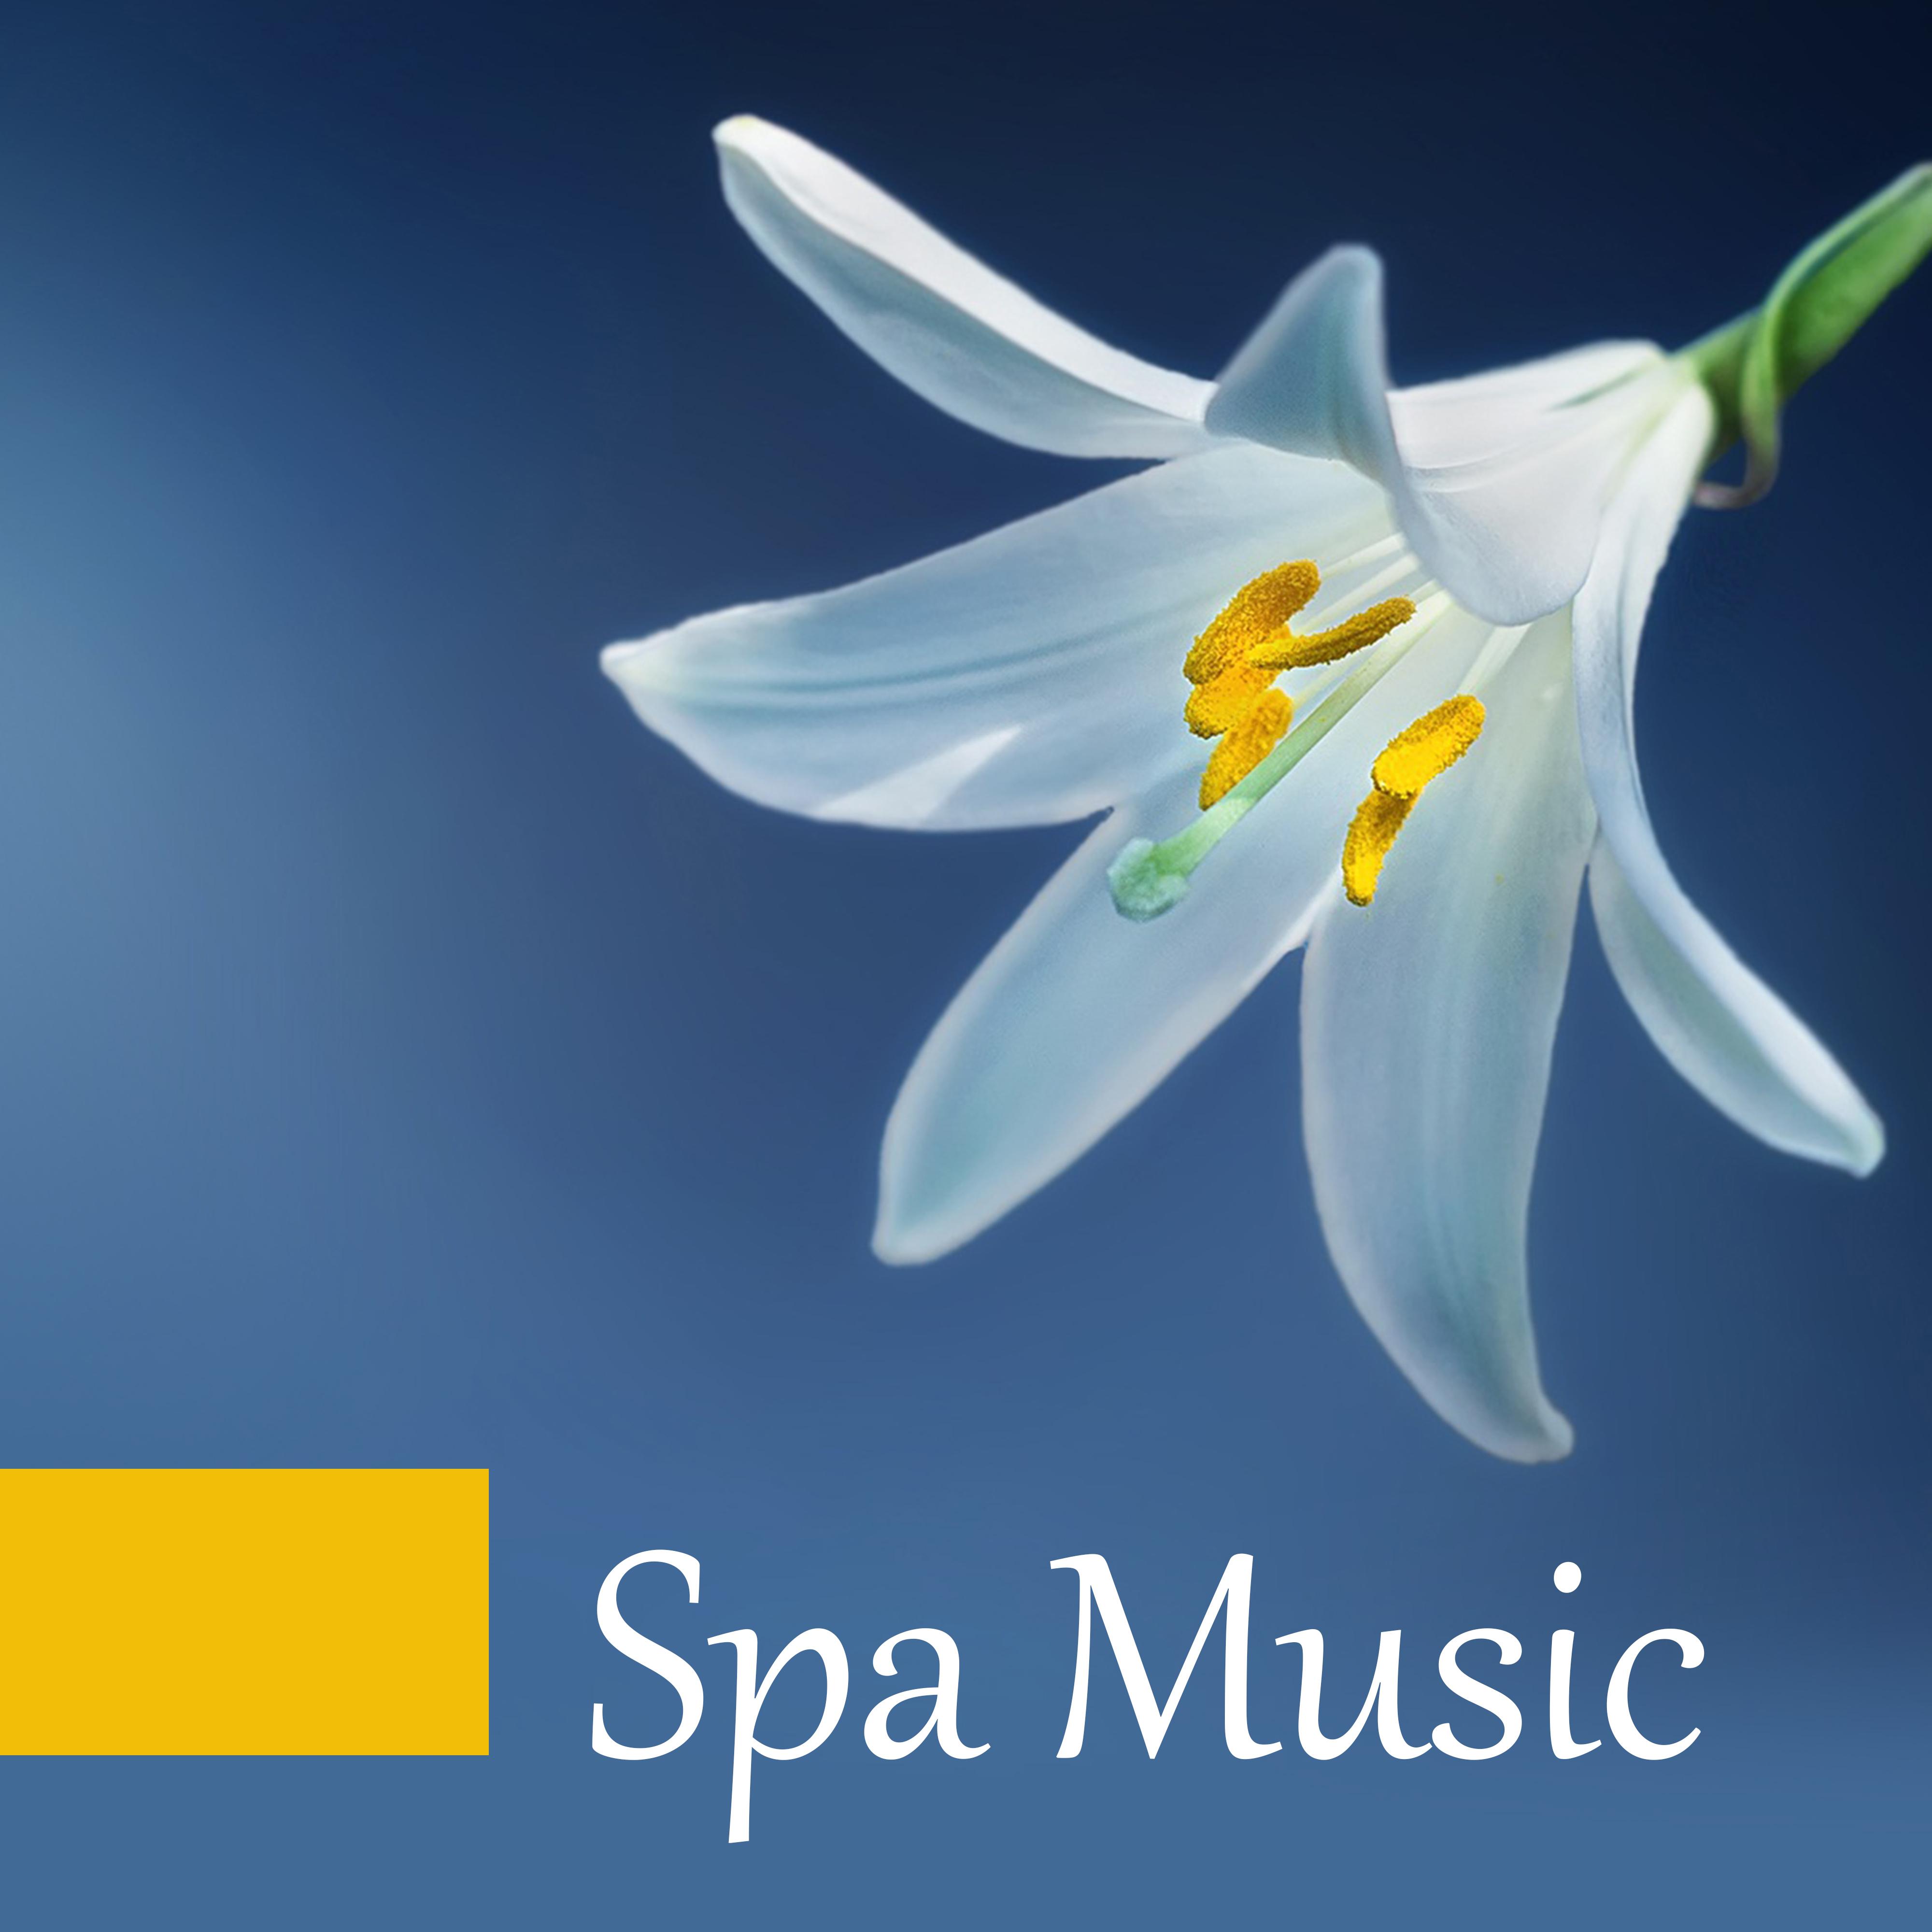 Spa Music – Pure Massage, Relaxation & Wellness, Pure Sleep, Soft Music to Calm Down, Relaxing Waves, Calm Mind, Silence